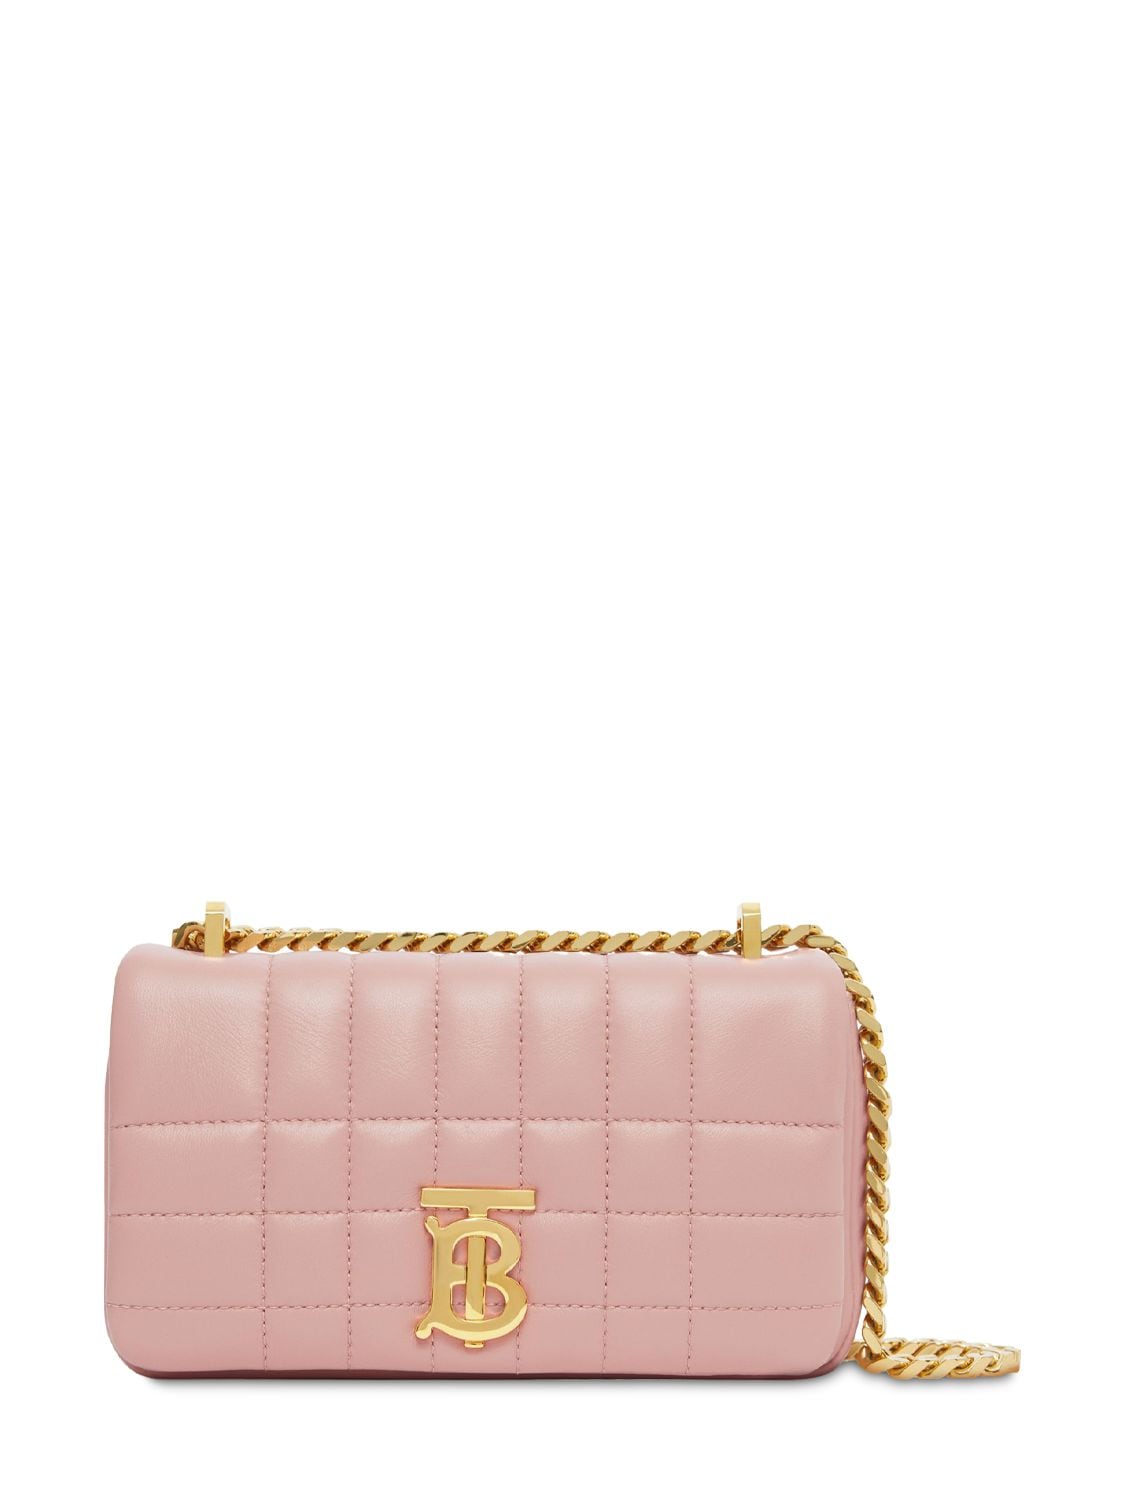 BURBERRY MINI LOLA QUILTED LEATHER SHOULDER BAG